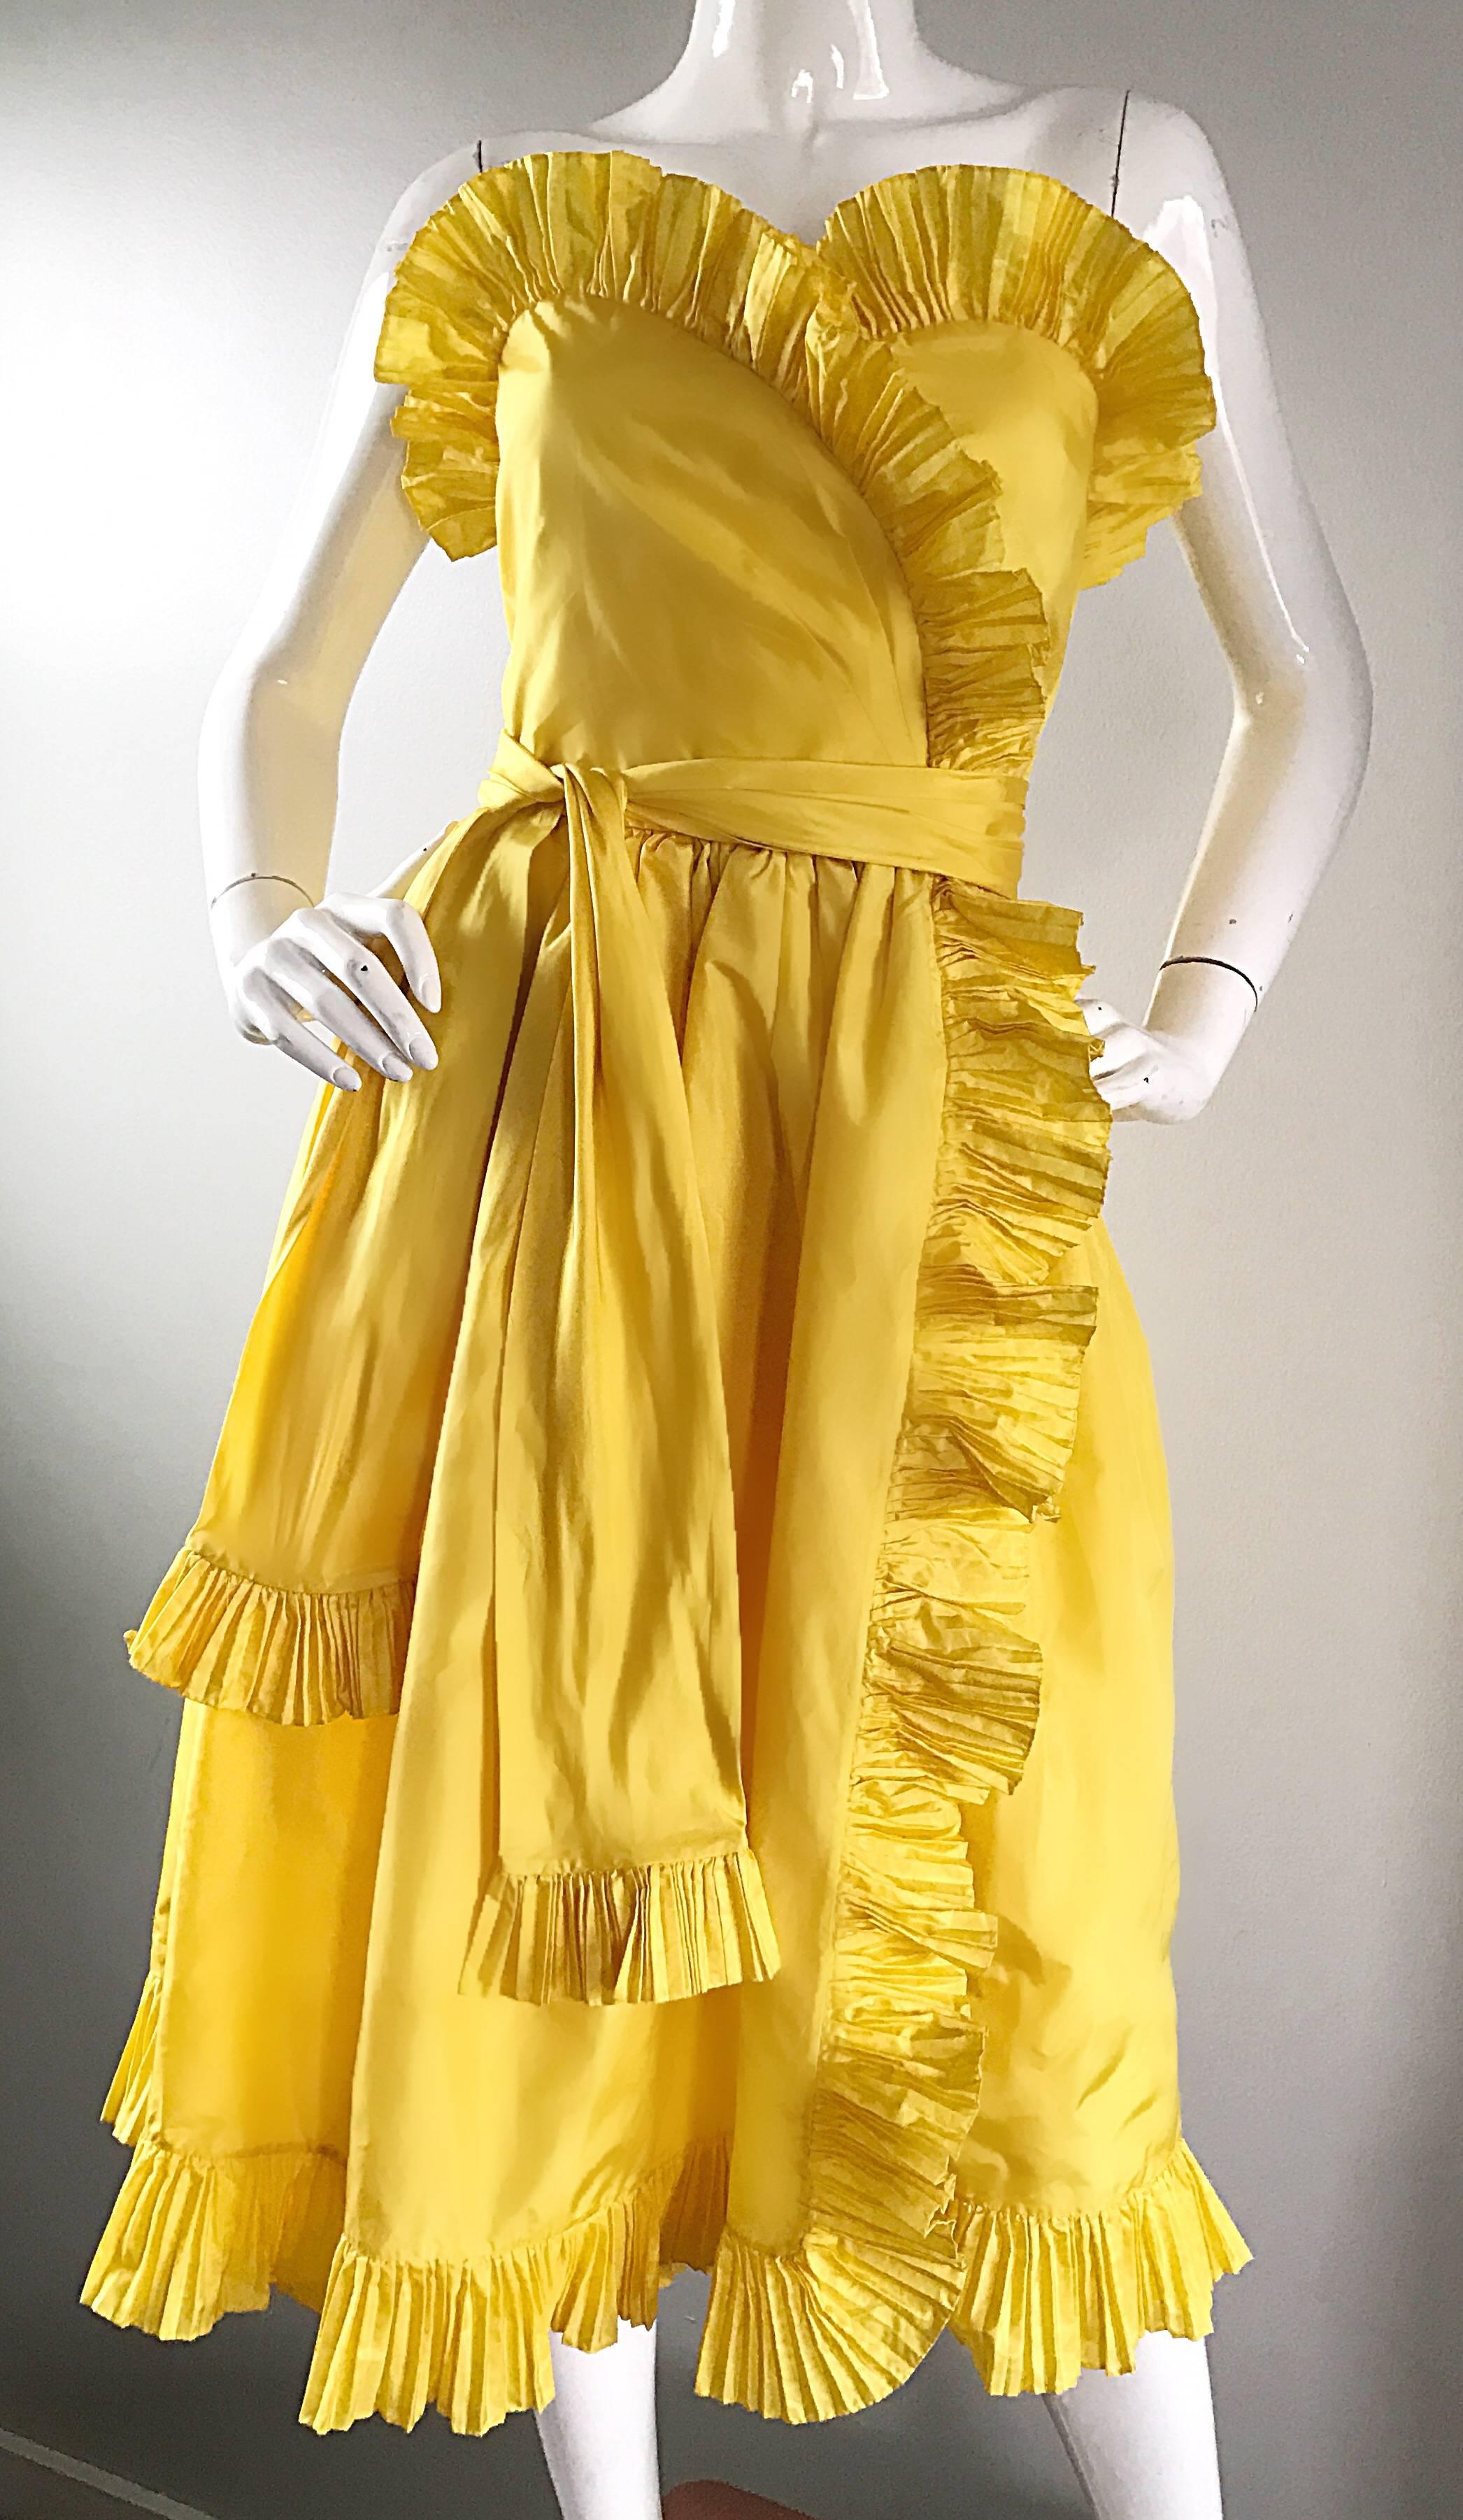 Beautiful vintage 80s BILL BLASS canary yellow silk taffeta origami strapless cocktail dress AND matching sash belt! The perfect yellow color! Origami like ruffles along the bust, side skirt, and hem. Sash also features pleated ruffles at each end.